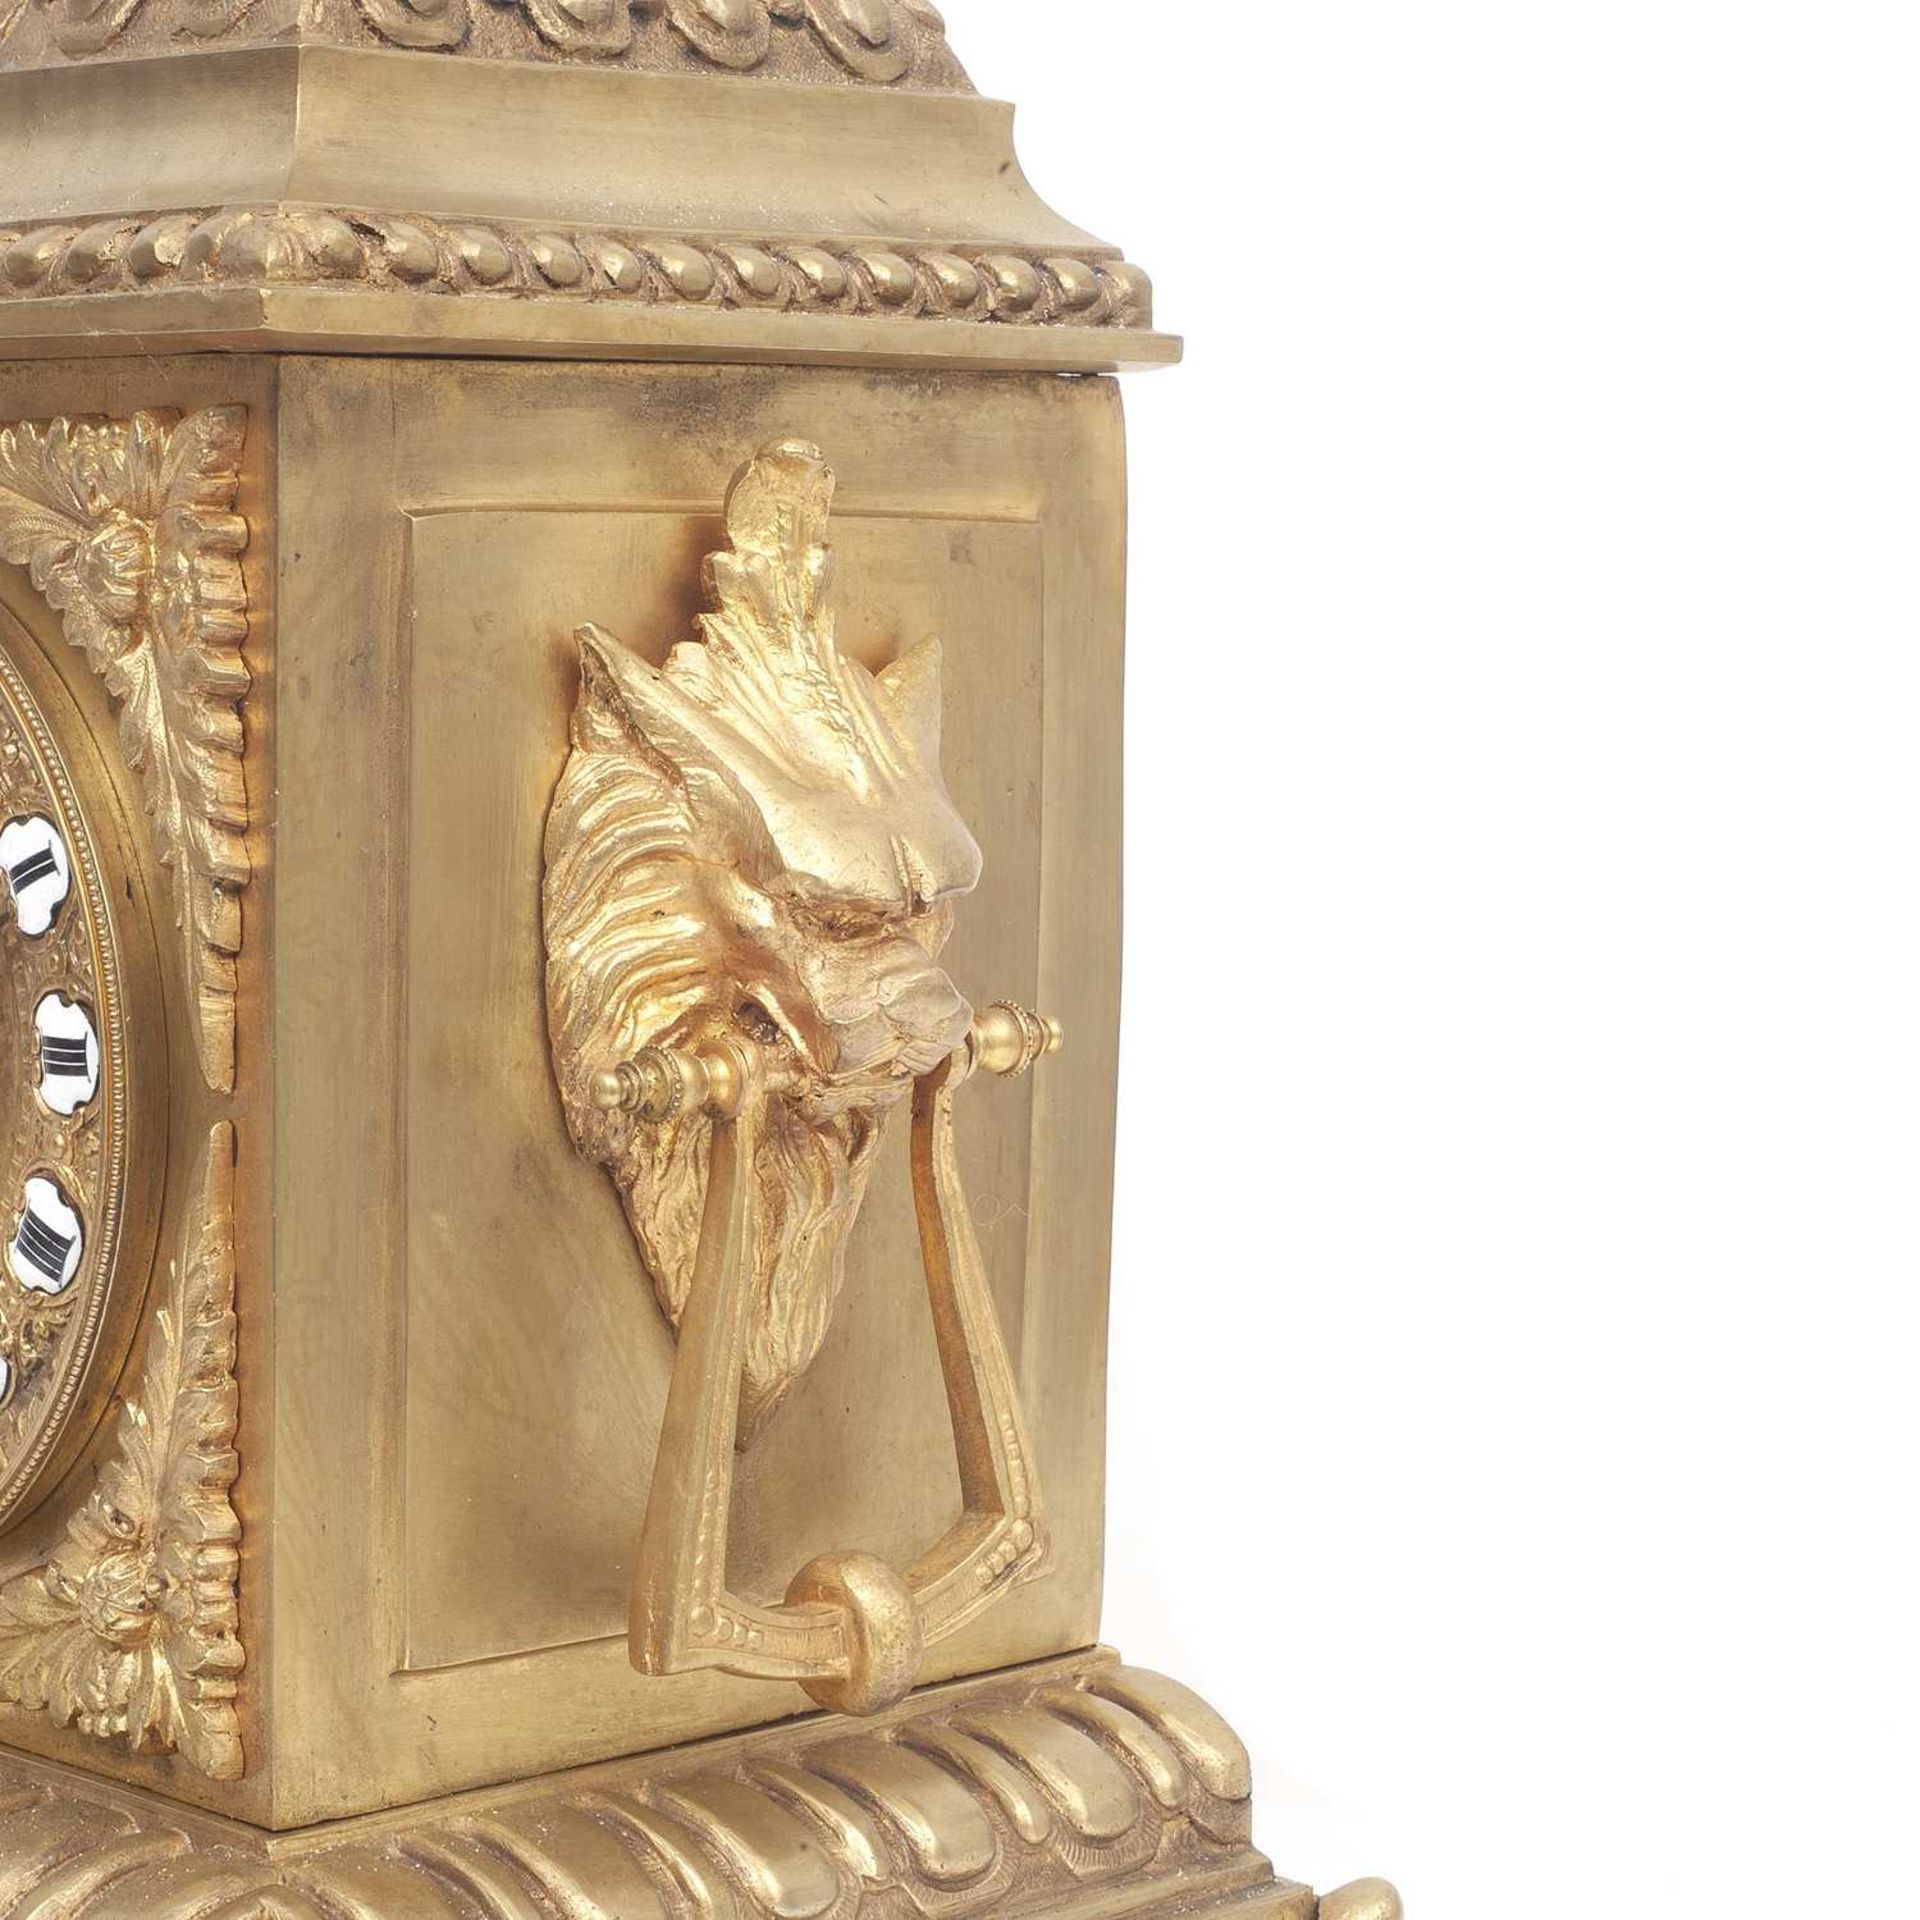 A LARGE LATE 19TH CENTURY FRENCH GILT BRONZE MANTEL CLOCK - Image 3 of 3